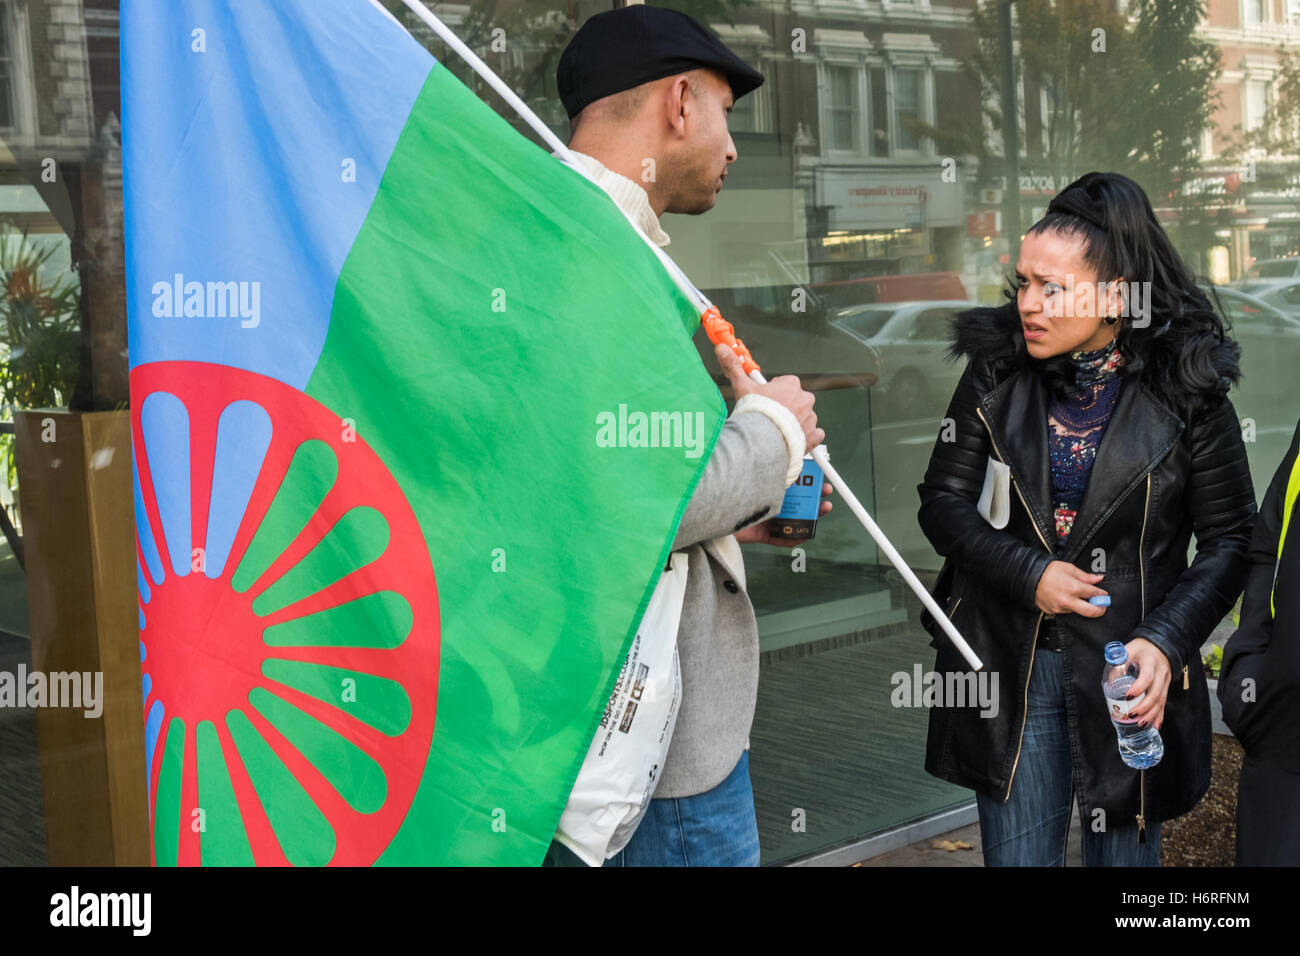 London, UK. Mon 31st October 2016. Roma living in the UK came with a Roma flag to protest at the Czech embassy in London after a young Romani man was attacked and killed by neo-Nazi skinheads as he went to buy cigarettes at a pizzeria in Žatec. The murdered man until a year ago was living in the UK and was a second cousin of Ladislav Balaz, Chair of the Roma Labour Group and Europe Roma Network, who came to hand a letter calling for the murder to be properly investigated to a representative from the Embassy. Credit:  Peter Marshall/Alamy Live News Stock Photo